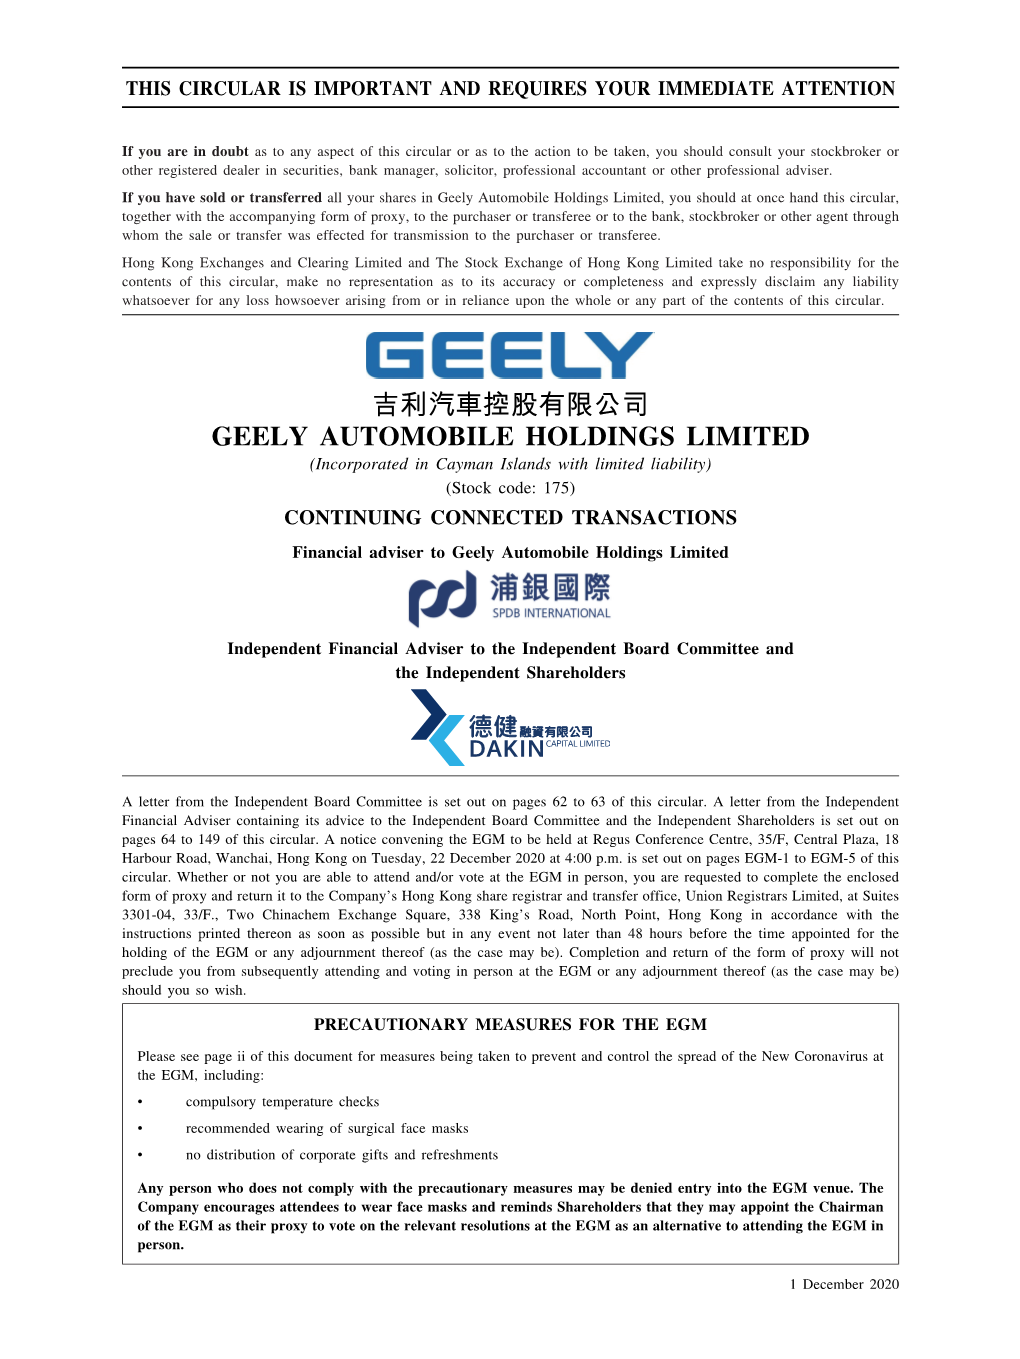 CONTINUING CONNECTED TRANSACTIONS Financial Adviser to Geely Automobile Holdings Limited